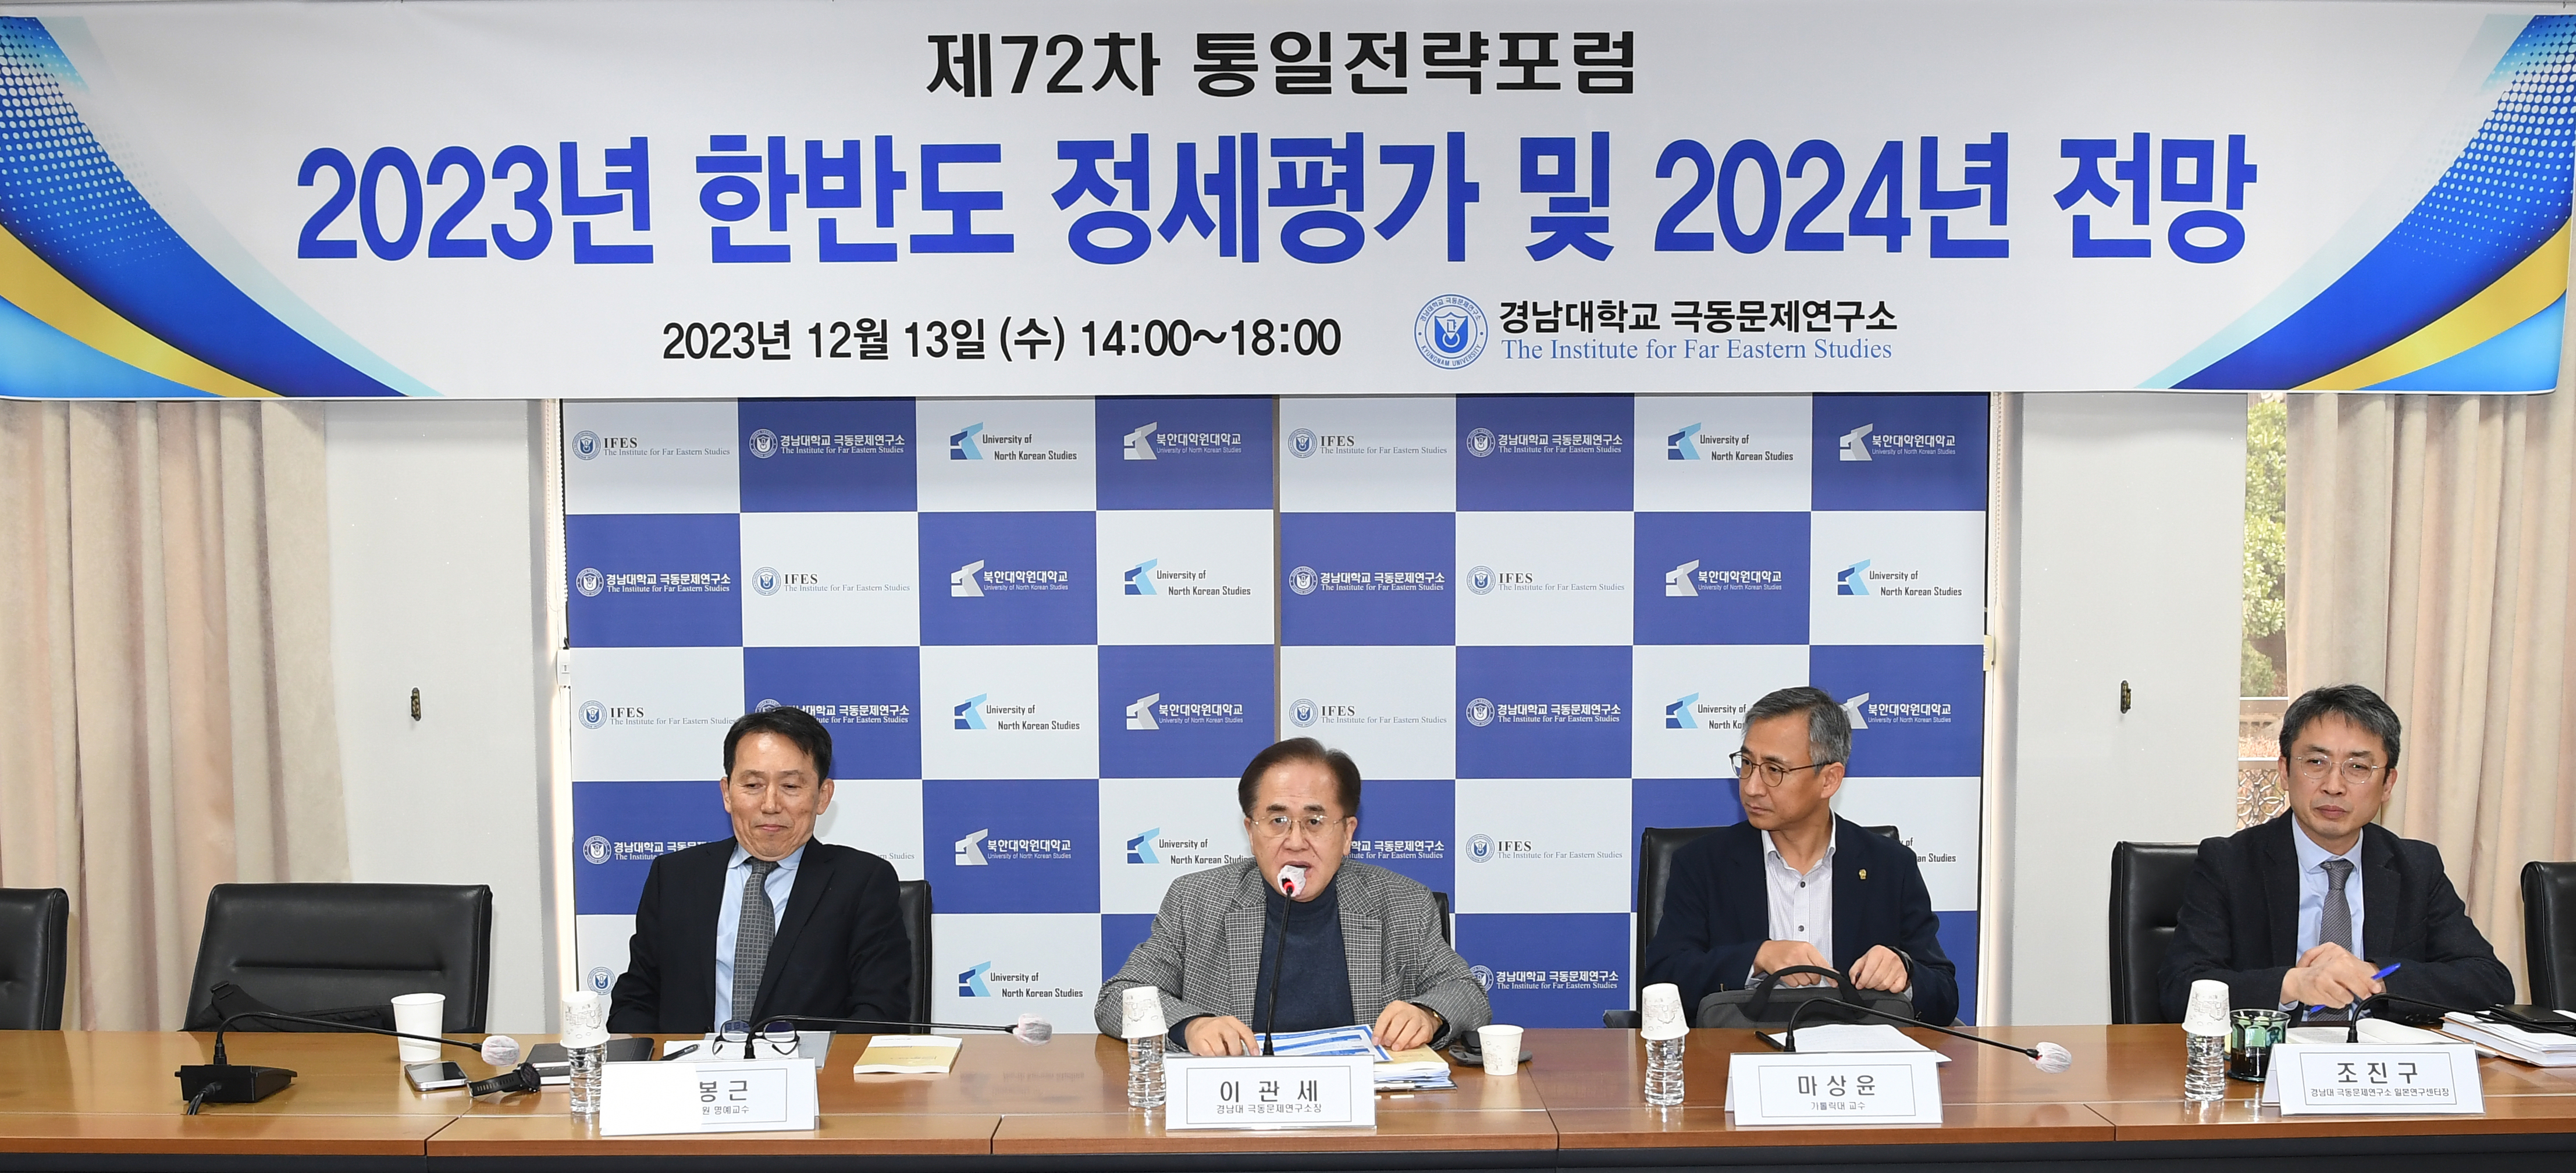 The 72nd Unification Strategy Forum Held 대표이미지